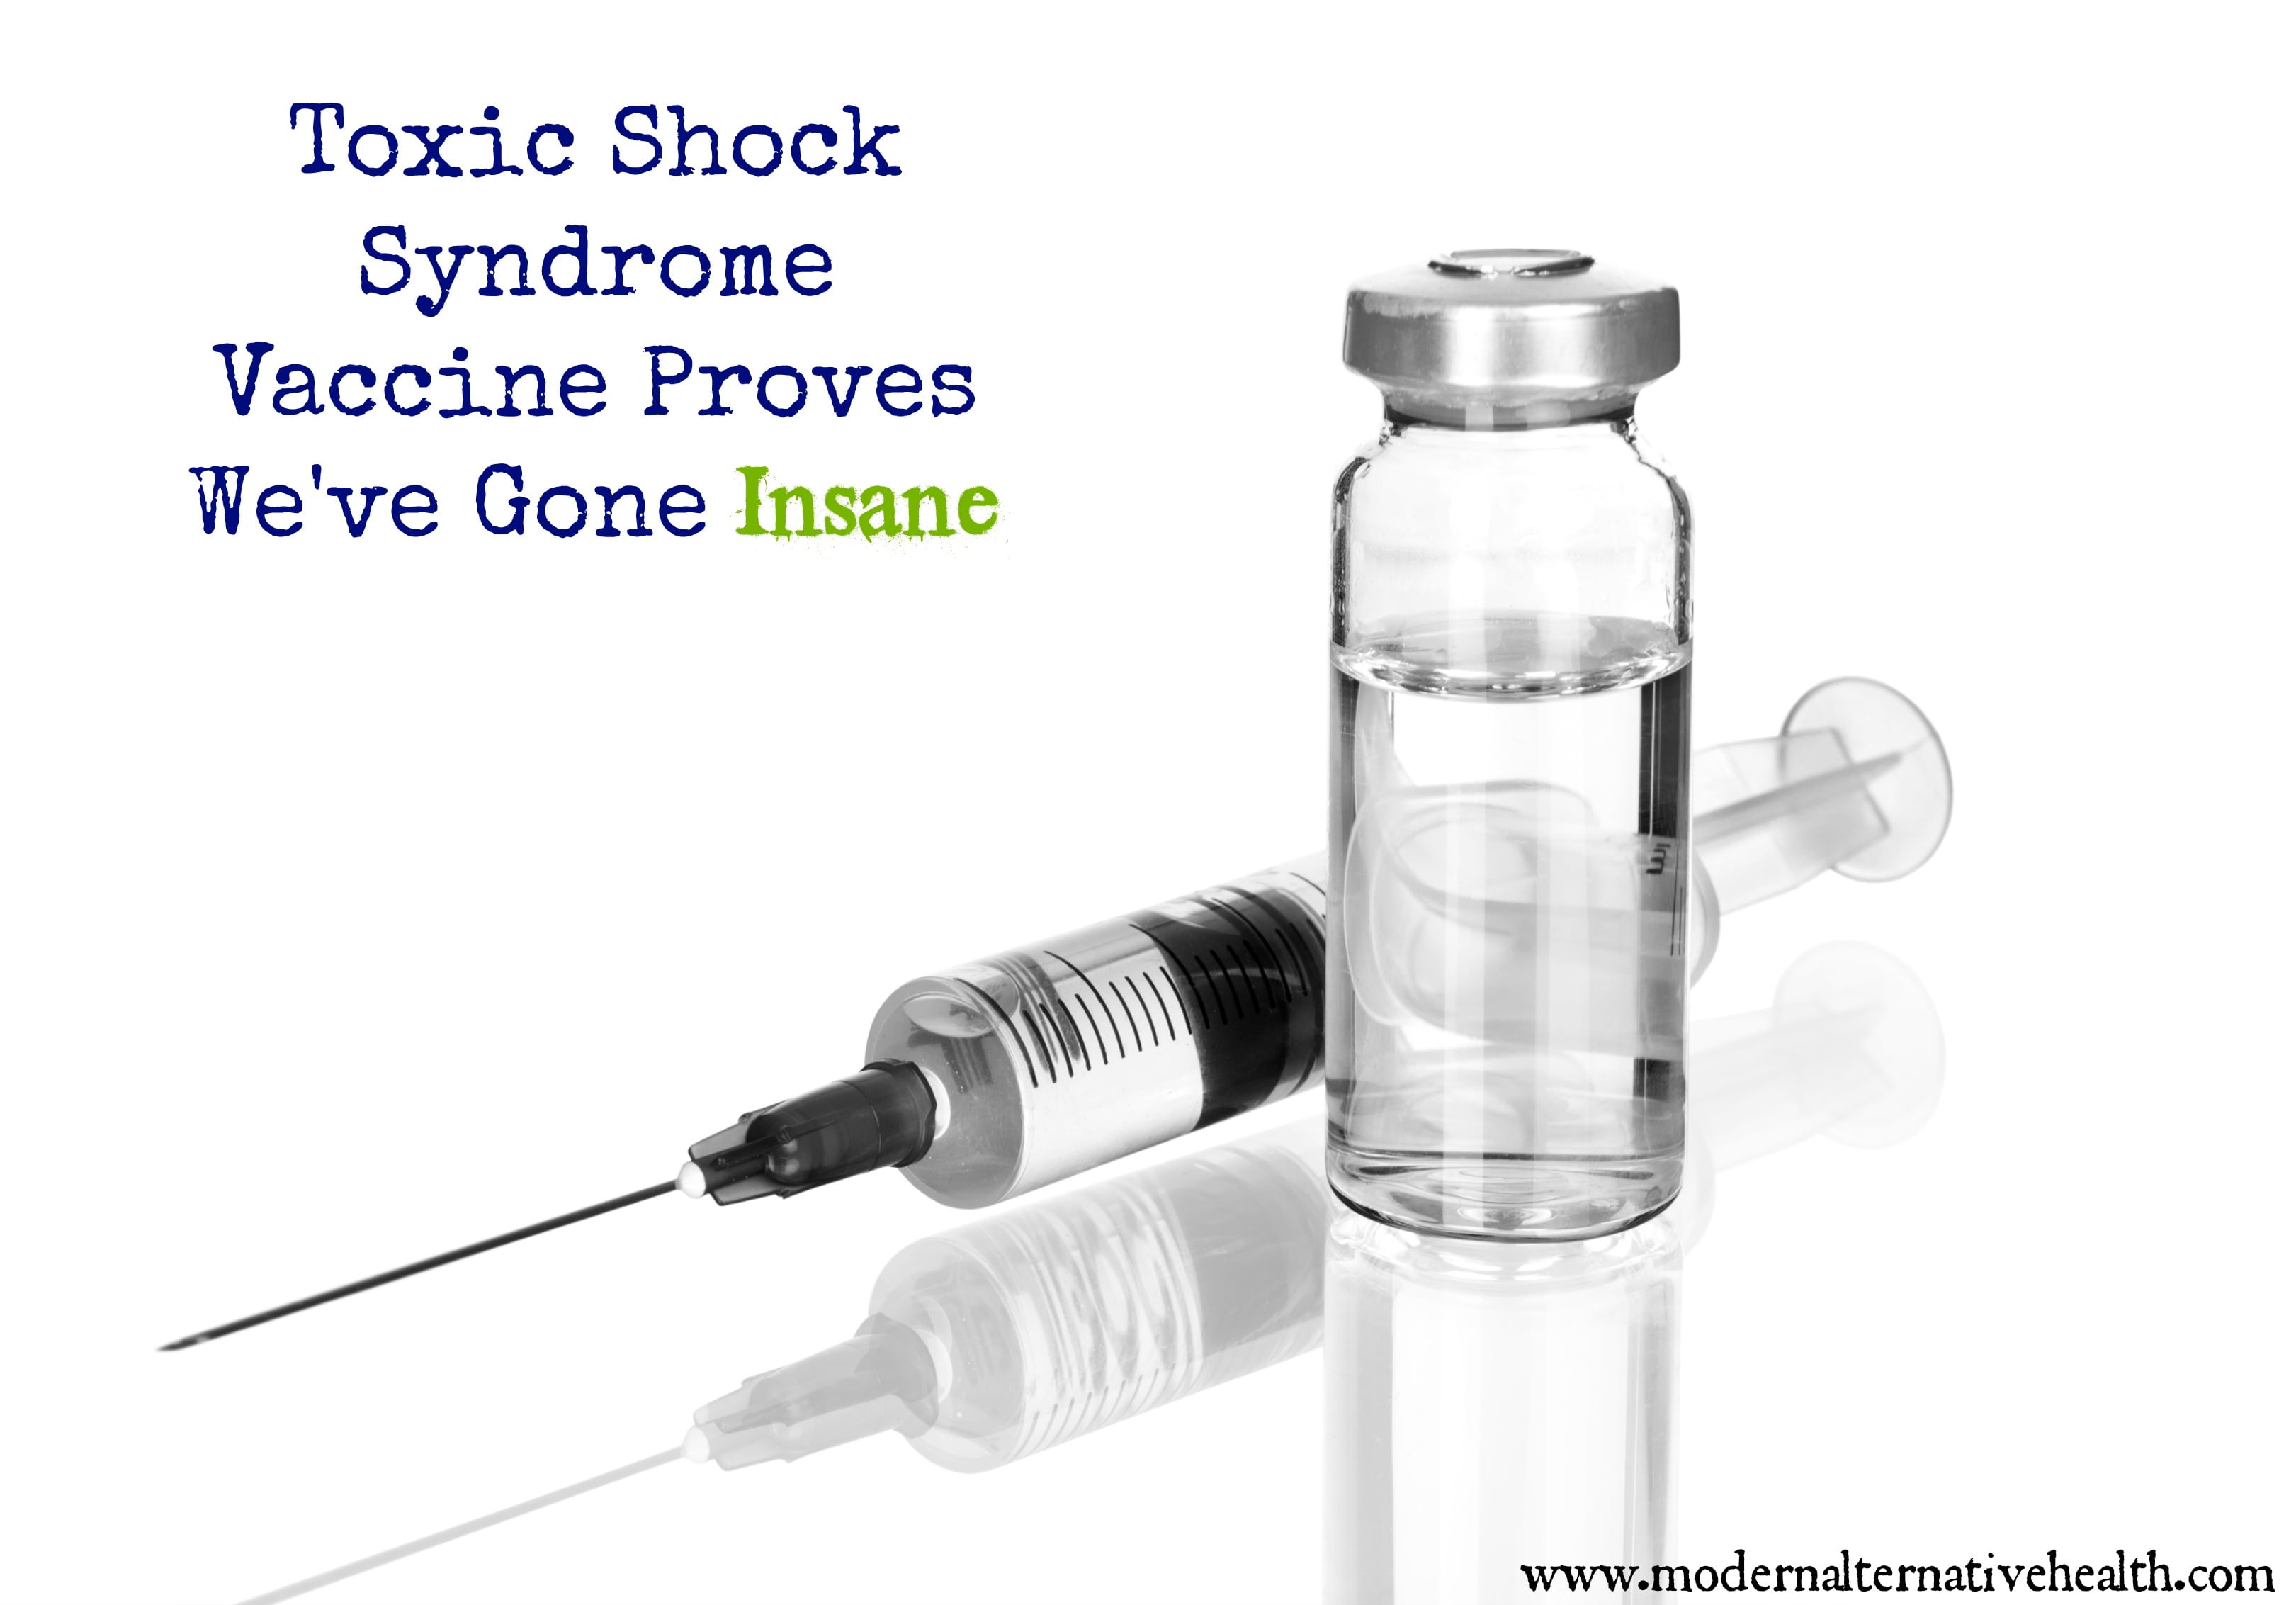 Toxic Shock Syndrome Vaccine Proves We've Gone Insane